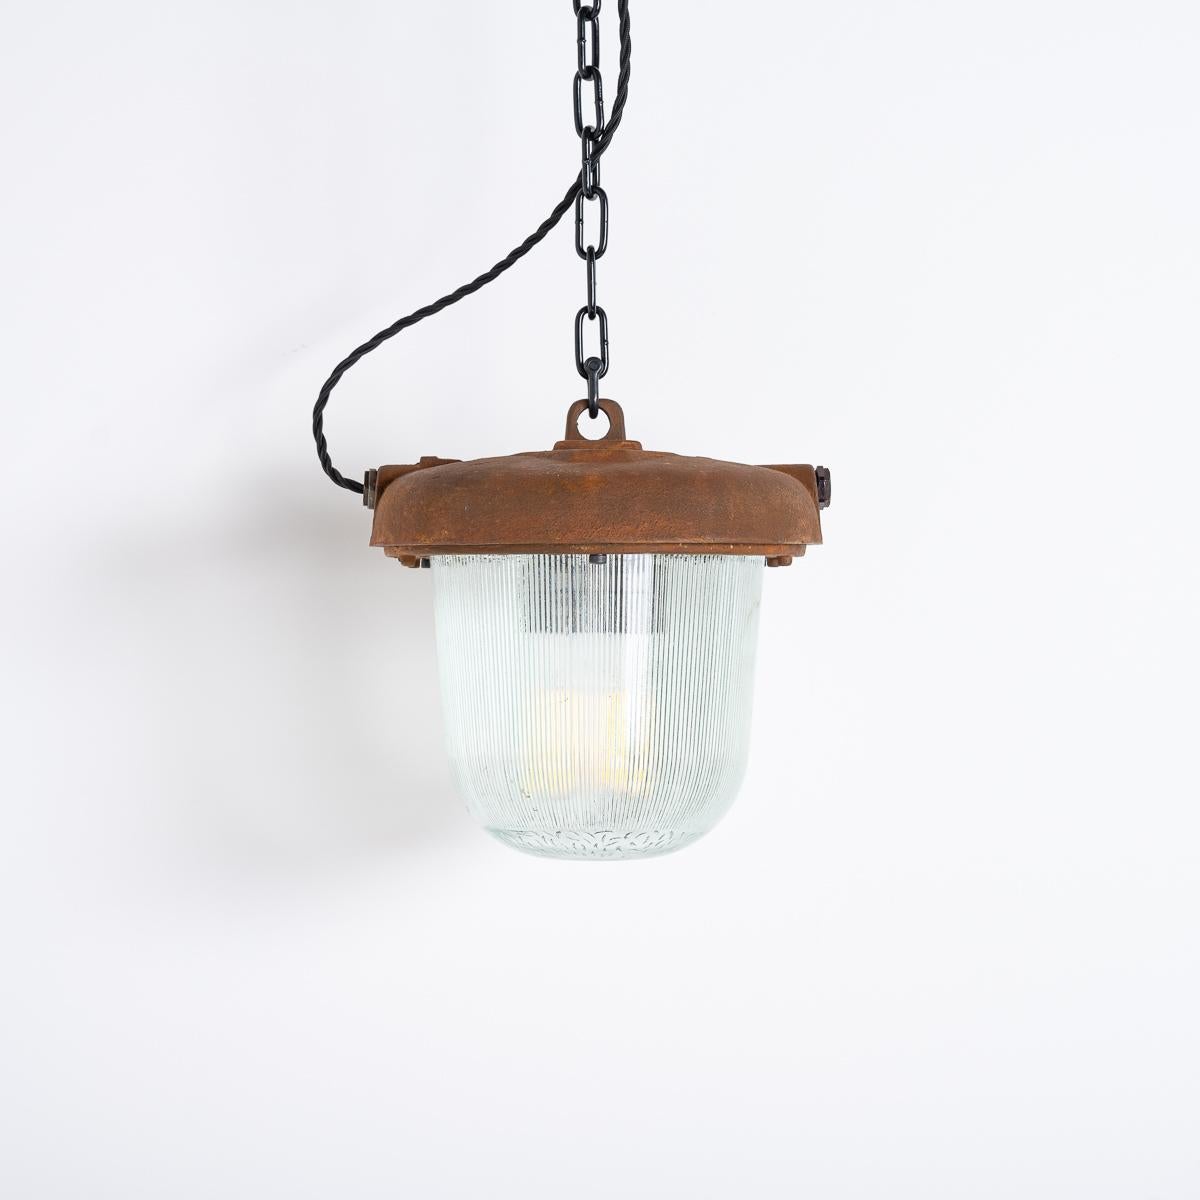 LARGE INDUSTRIAL RUSTED PENDANT LIGHTS

PRICE IS PER LIGHT

Original industrial pendants recovered from the former Eastern Bloc.

Manufactured by Polam Wilkasy circa 1960.

Heavy cast steel construction finished in our rusted finish and prismatic